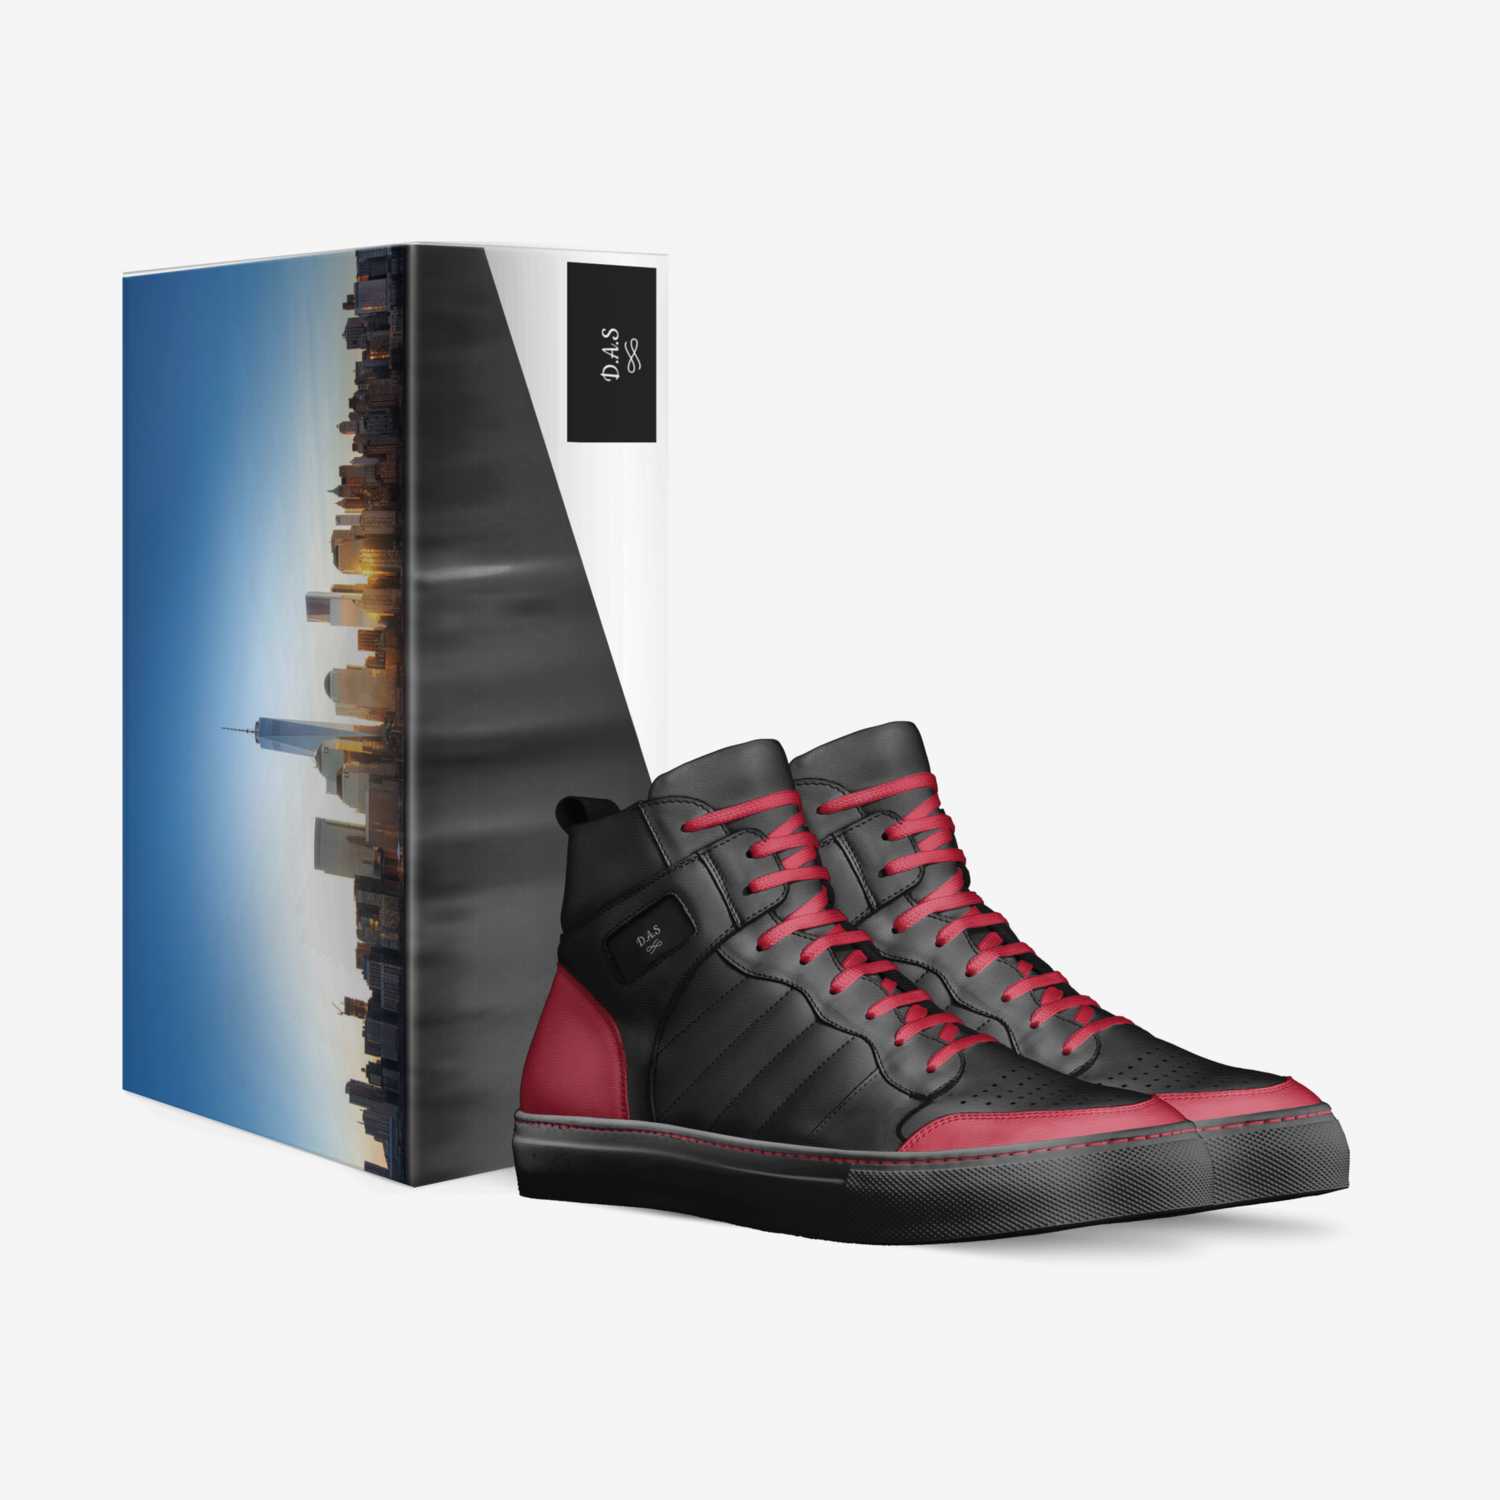 D.A.S custom made in Italy shoes by Devon Alexander | Box view